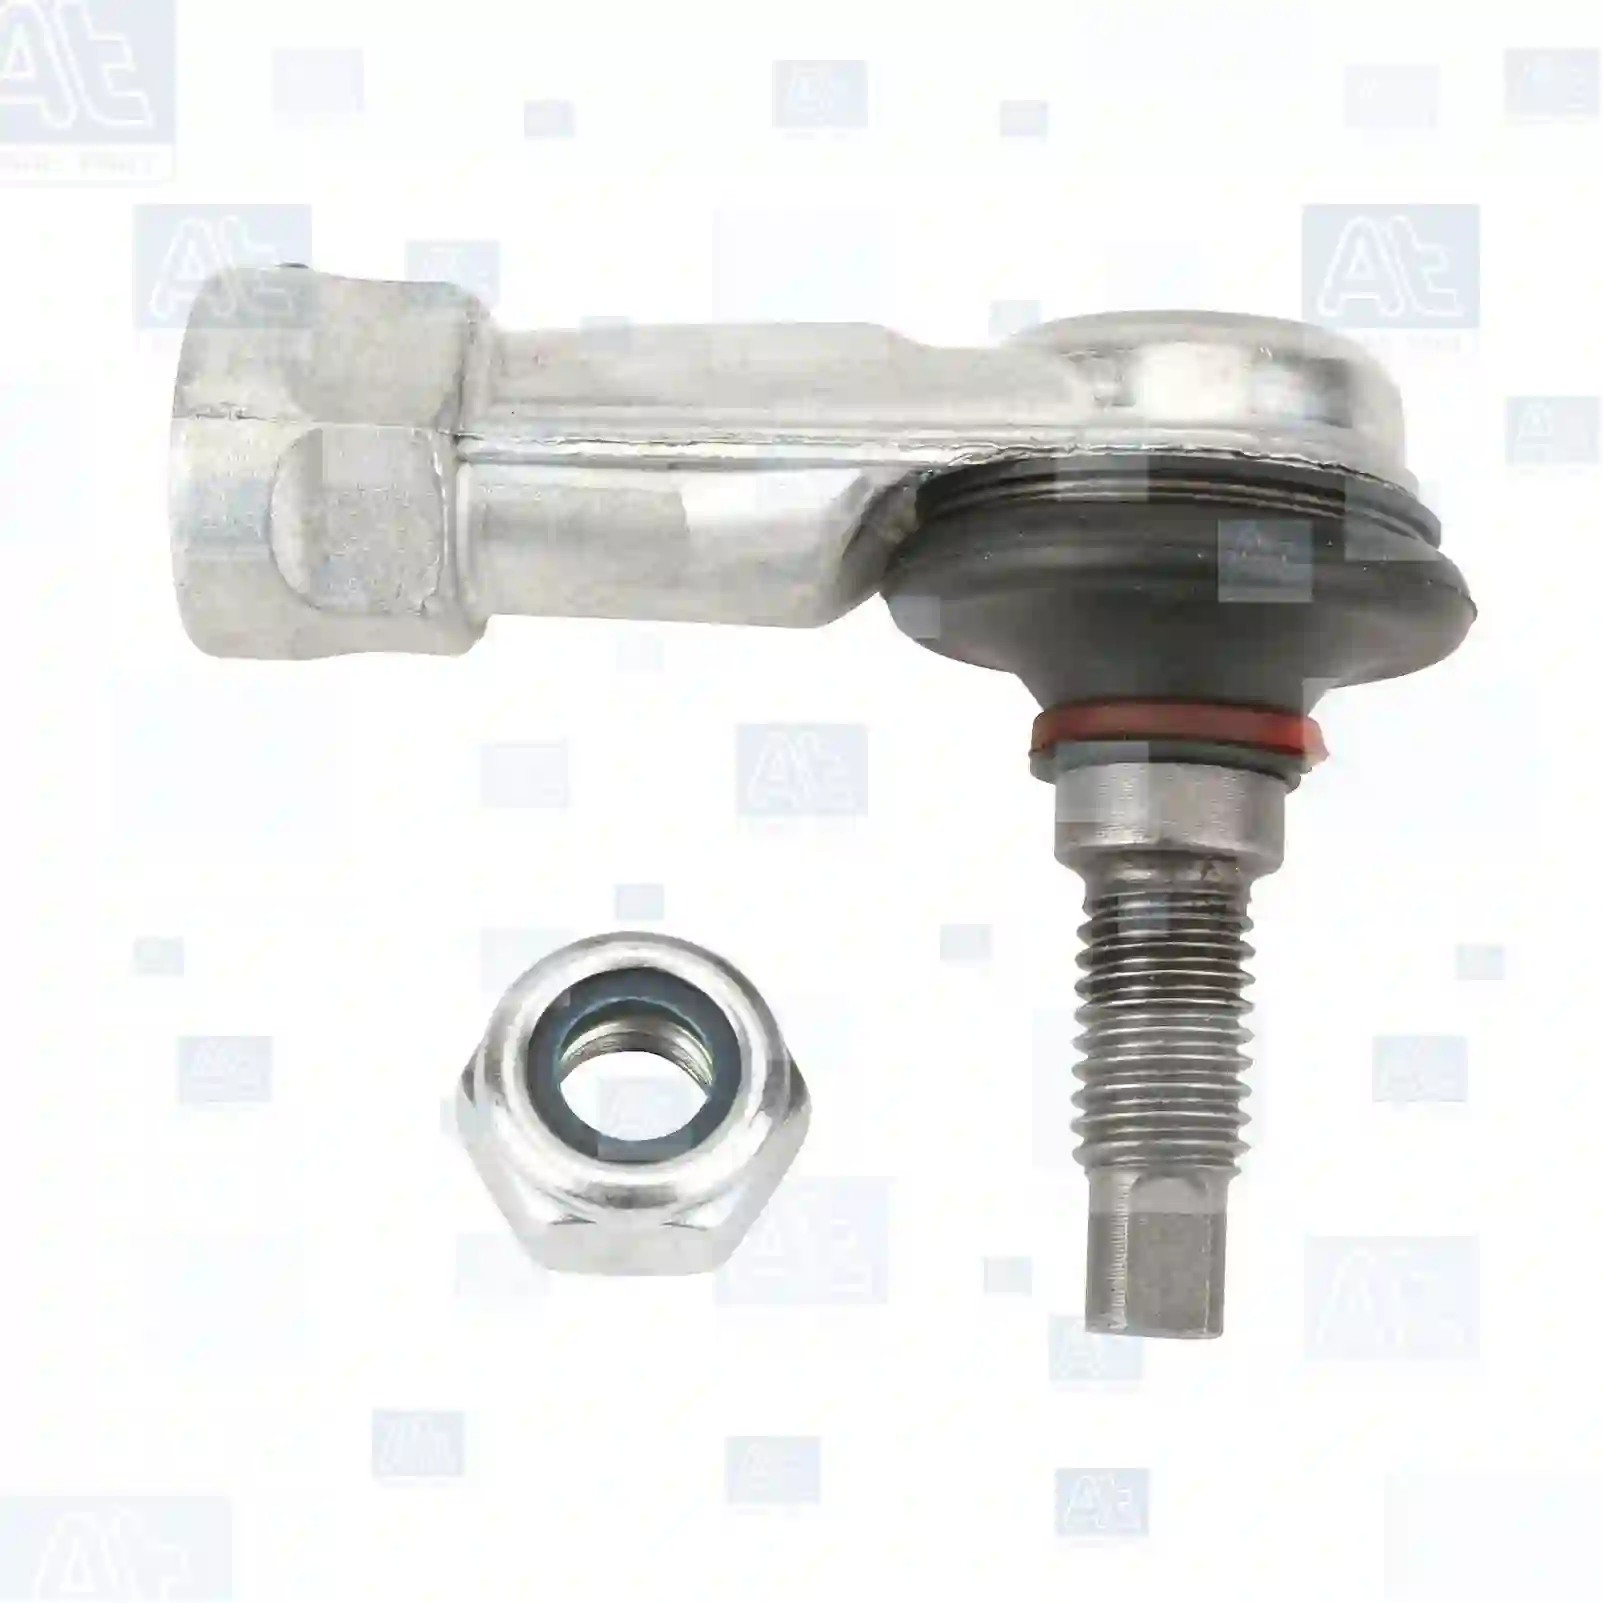 Ball joint, left hand thread, 77731618, 00021927, 0140363, 0592106, 0656084, 1249088, 140363, 1457400, 592106, 656084, 42485638, 191708, 7394145, 02524128, 08198187, 42485638, 00191708, 02524128, 08198187, 42485638, 500056188, 5001000134, 8198187, 2150021200, 5004154, 81953016063, 81953016131, 81953016171, 81953016174, 90900989011, 0002684789, 0002686189, 0002689789, 3662680489, 011010221, 34437-9X403, 5006017504, 7401190132, 1384897, 305319, 371451, 421325, 523743, 525732, 527055, 8321999836, 0928500070, 0732107019, 1190132, 11901329, 1696684, ZG40134-0008 ||  77731618 At Spare Part | Engine, Accelerator Pedal, Camshaft, Connecting Rod, Crankcase, Crankshaft, Cylinder Head, Engine Suspension Mountings, Exhaust Manifold, Exhaust Gas Recirculation, Filter Kits, Flywheel Housing, General Overhaul Kits, Engine, Intake Manifold, Oil Cleaner, Oil Cooler, Oil Filter, Oil Pump, Oil Sump, Piston & Liner, Sensor & Switch, Timing Case, Turbocharger, Cooling System, Belt Tensioner, Coolant Filter, Coolant Pipe, Corrosion Prevention Agent, Drive, Expansion Tank, Fan, Intercooler, Monitors & Gauges, Radiator, Thermostat, V-Belt / Timing belt, Water Pump, Fuel System, Electronical Injector Unit, Feed Pump, Fuel Filter, cpl., Fuel Gauge Sender,  Fuel Line, Fuel Pump, Fuel Tank, Injection Line Kit, Injection Pump, Exhaust System, Clutch & Pedal, Gearbox, Propeller Shaft, Axles, Brake System, Hubs & Wheels, Suspension, Leaf Spring, Universal Parts / Accessories, Steering, Electrical System, Cabin Ball joint, left hand thread, 77731618, 00021927, 0140363, 0592106, 0656084, 1249088, 140363, 1457400, 592106, 656084, 42485638, 191708, 7394145, 02524128, 08198187, 42485638, 00191708, 02524128, 08198187, 42485638, 500056188, 5001000134, 8198187, 2150021200, 5004154, 81953016063, 81953016131, 81953016171, 81953016174, 90900989011, 0002684789, 0002686189, 0002689789, 3662680489, 011010221, 34437-9X403, 5006017504, 7401190132, 1384897, 305319, 371451, 421325, 523743, 525732, 527055, 8321999836, 0928500070, 0732107019, 1190132, 11901329, 1696684, ZG40134-0008 ||  77731618 At Spare Part | Engine, Accelerator Pedal, Camshaft, Connecting Rod, Crankcase, Crankshaft, Cylinder Head, Engine Suspension Mountings, Exhaust Manifold, Exhaust Gas Recirculation, Filter Kits, Flywheel Housing, General Overhaul Kits, Engine, Intake Manifold, Oil Cleaner, Oil Cooler, Oil Filter, Oil Pump, Oil Sump, Piston & Liner, Sensor & Switch, Timing Case, Turbocharger, Cooling System, Belt Tensioner, Coolant Filter, Coolant Pipe, Corrosion Prevention Agent, Drive, Expansion Tank, Fan, Intercooler, Monitors & Gauges, Radiator, Thermostat, V-Belt / Timing belt, Water Pump, Fuel System, Electronical Injector Unit, Feed Pump, Fuel Filter, cpl., Fuel Gauge Sender,  Fuel Line, Fuel Pump, Fuel Tank, Injection Line Kit, Injection Pump, Exhaust System, Clutch & Pedal, Gearbox, Propeller Shaft, Axles, Brake System, Hubs & Wheels, Suspension, Leaf Spring, Universal Parts / Accessories, Steering, Electrical System, Cabin